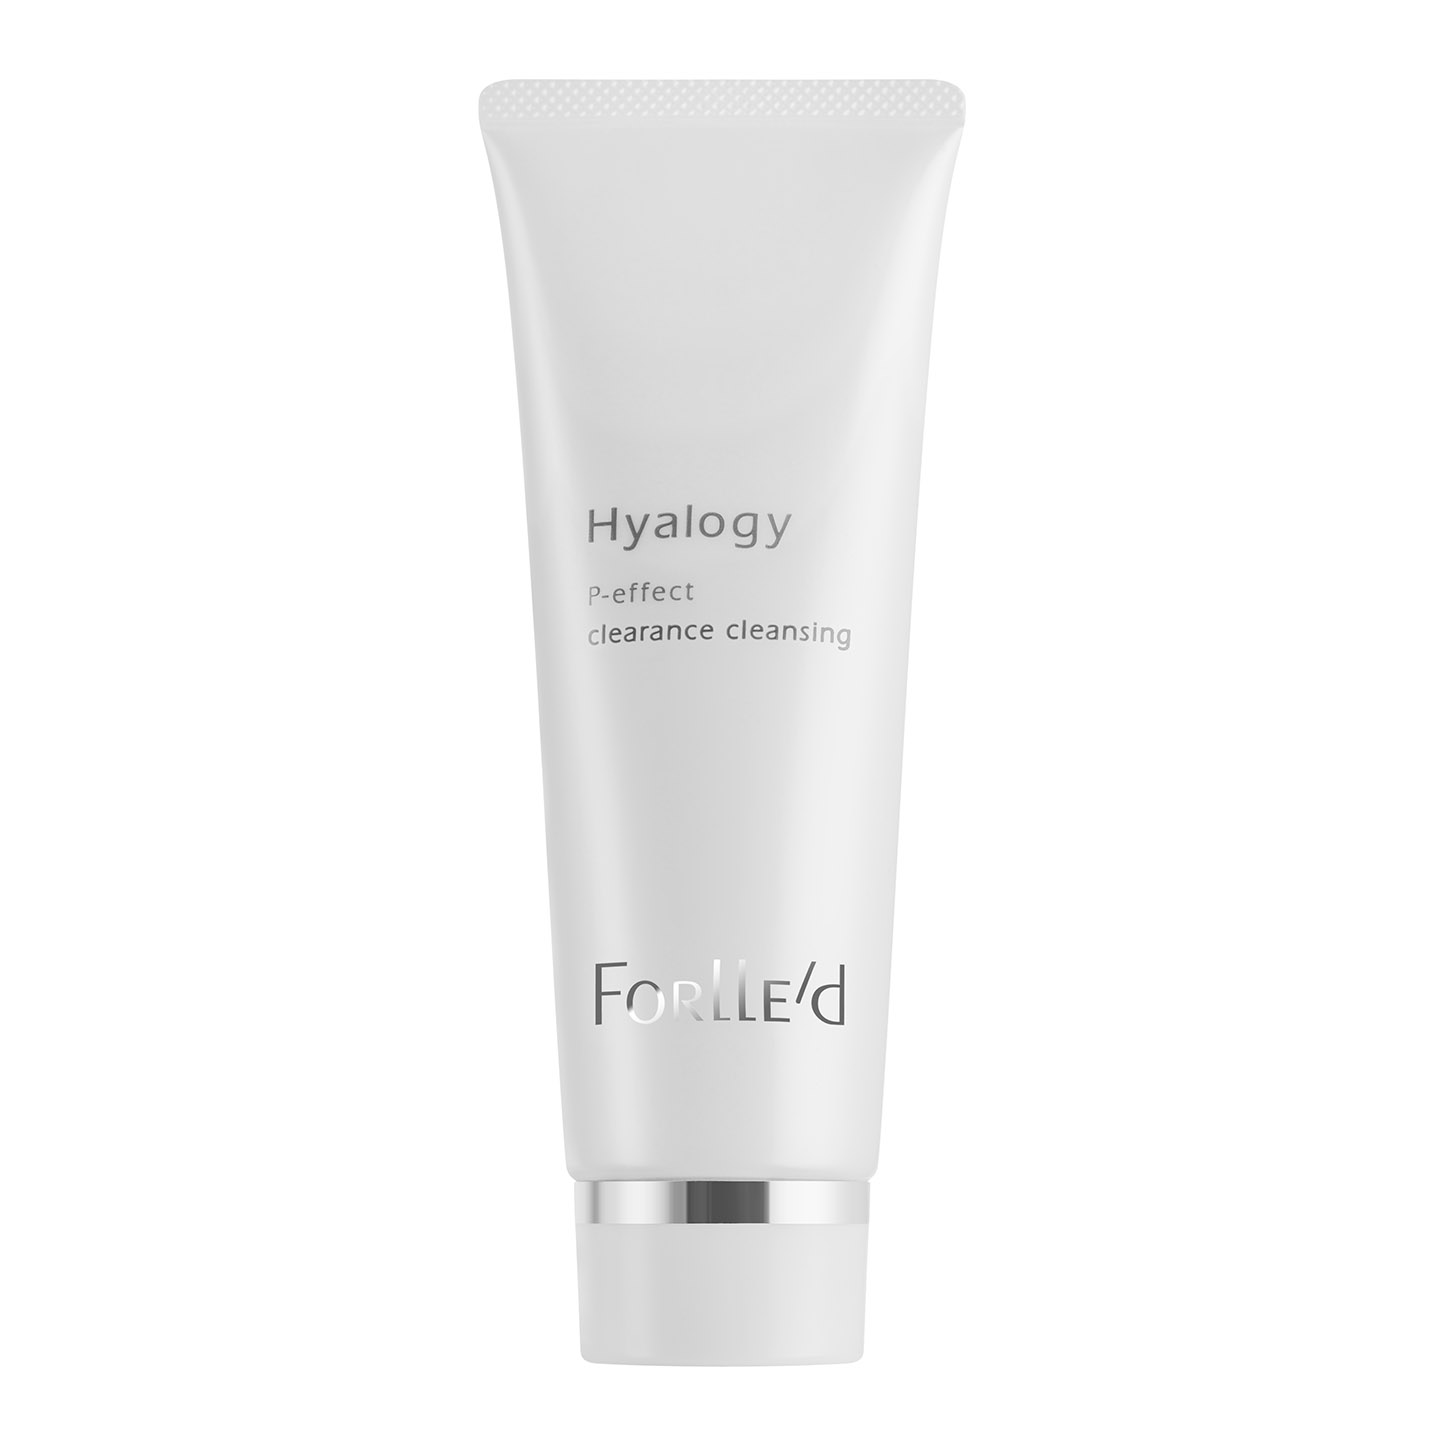 Hyalogy P-effect clearance cleansing PROF